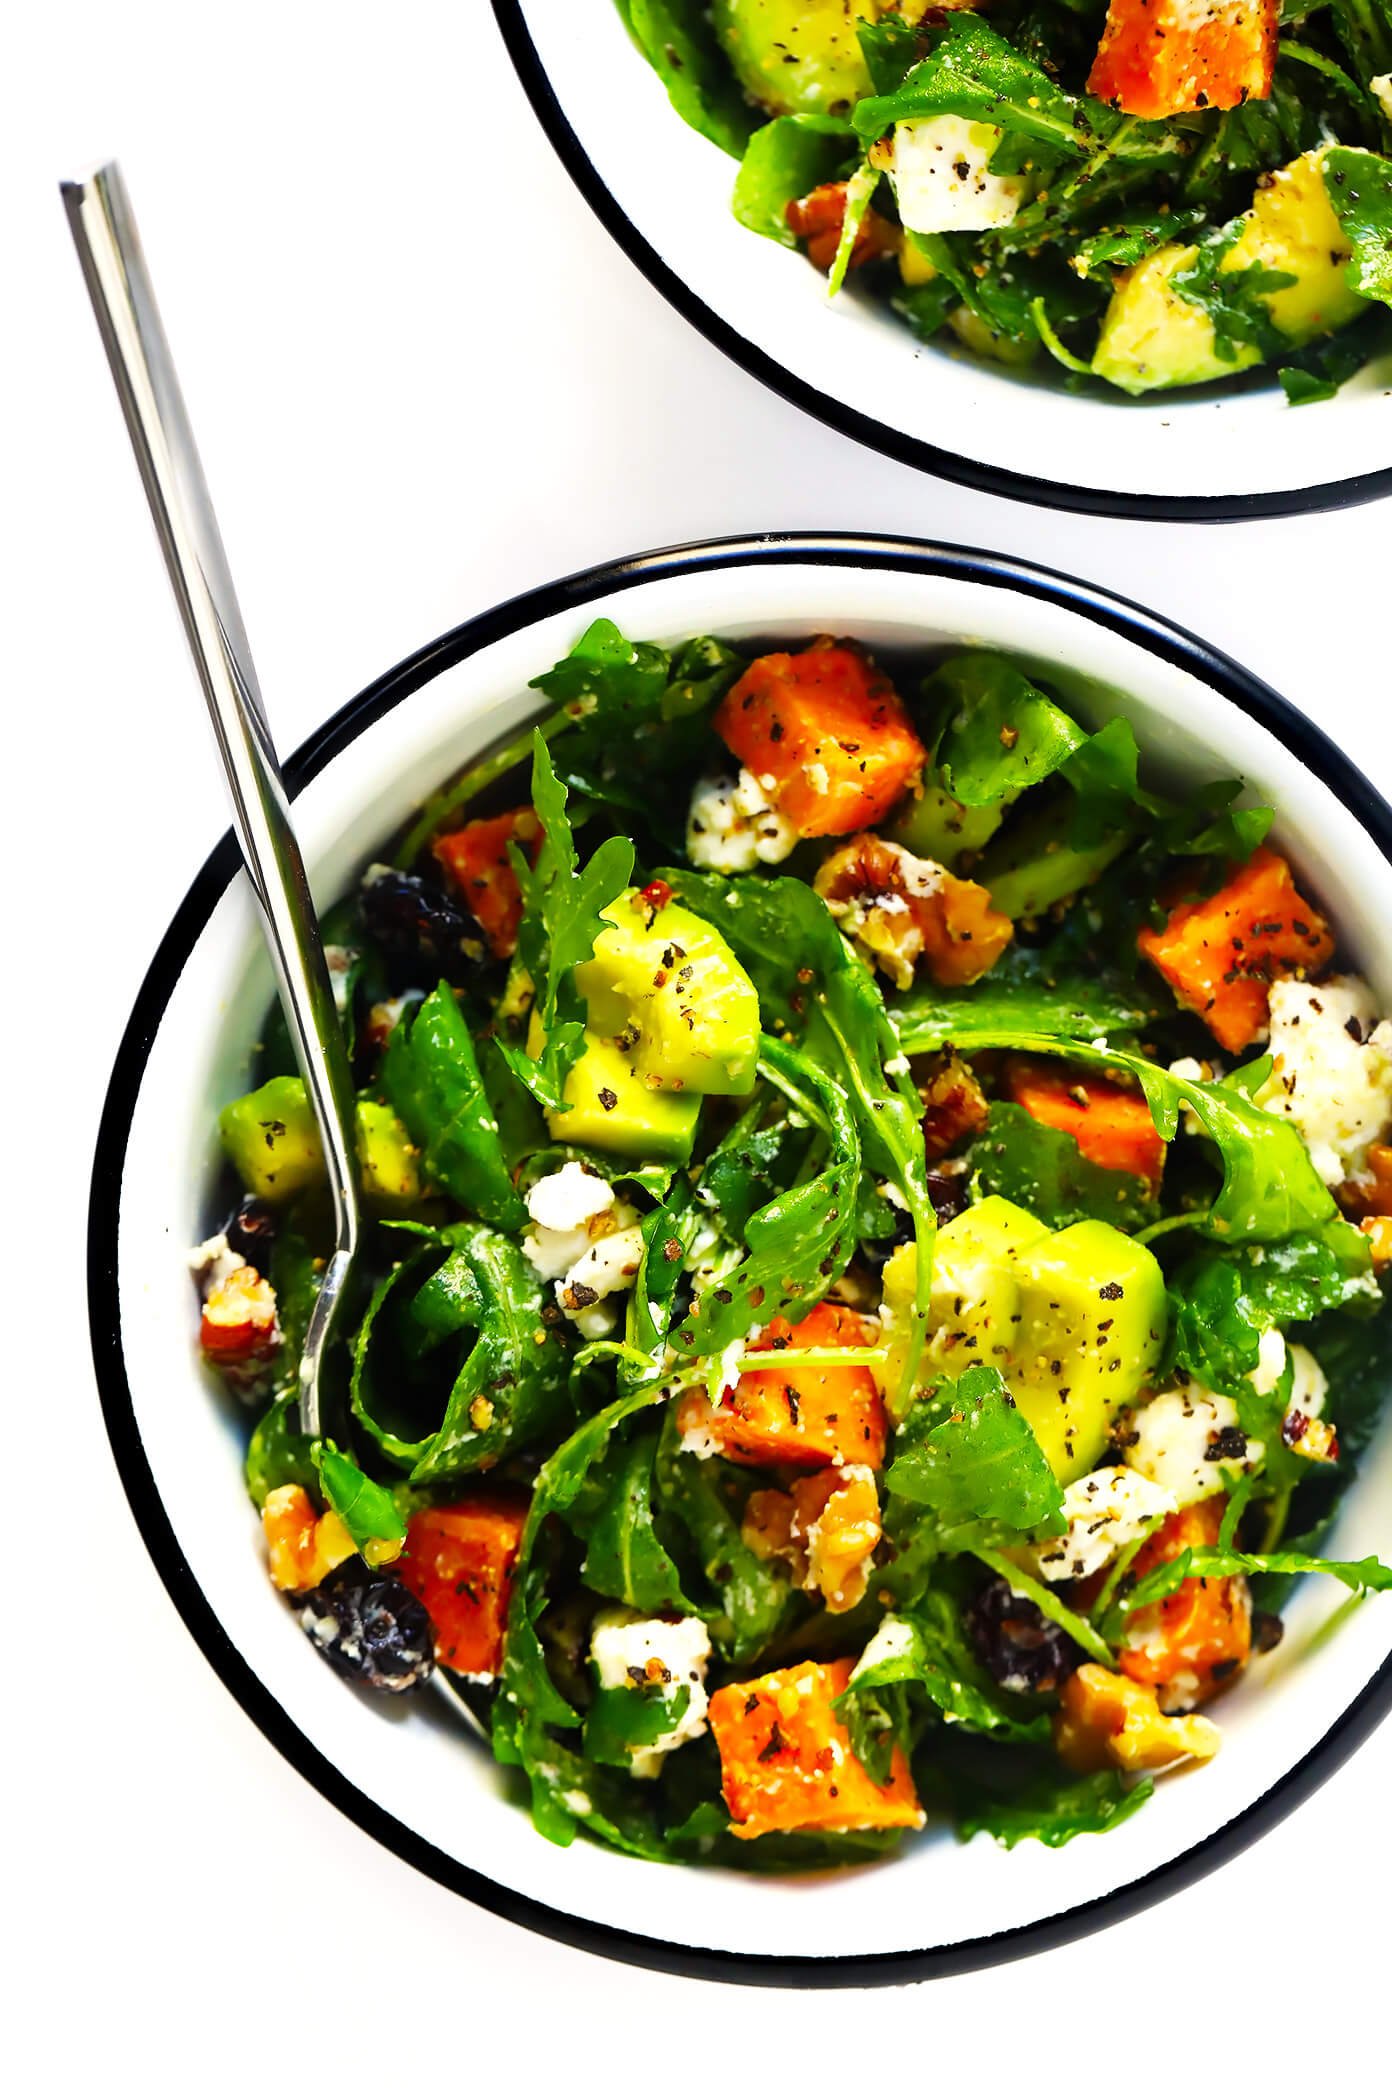 Image shows two bowls of salad topped with avocado and feta cheese